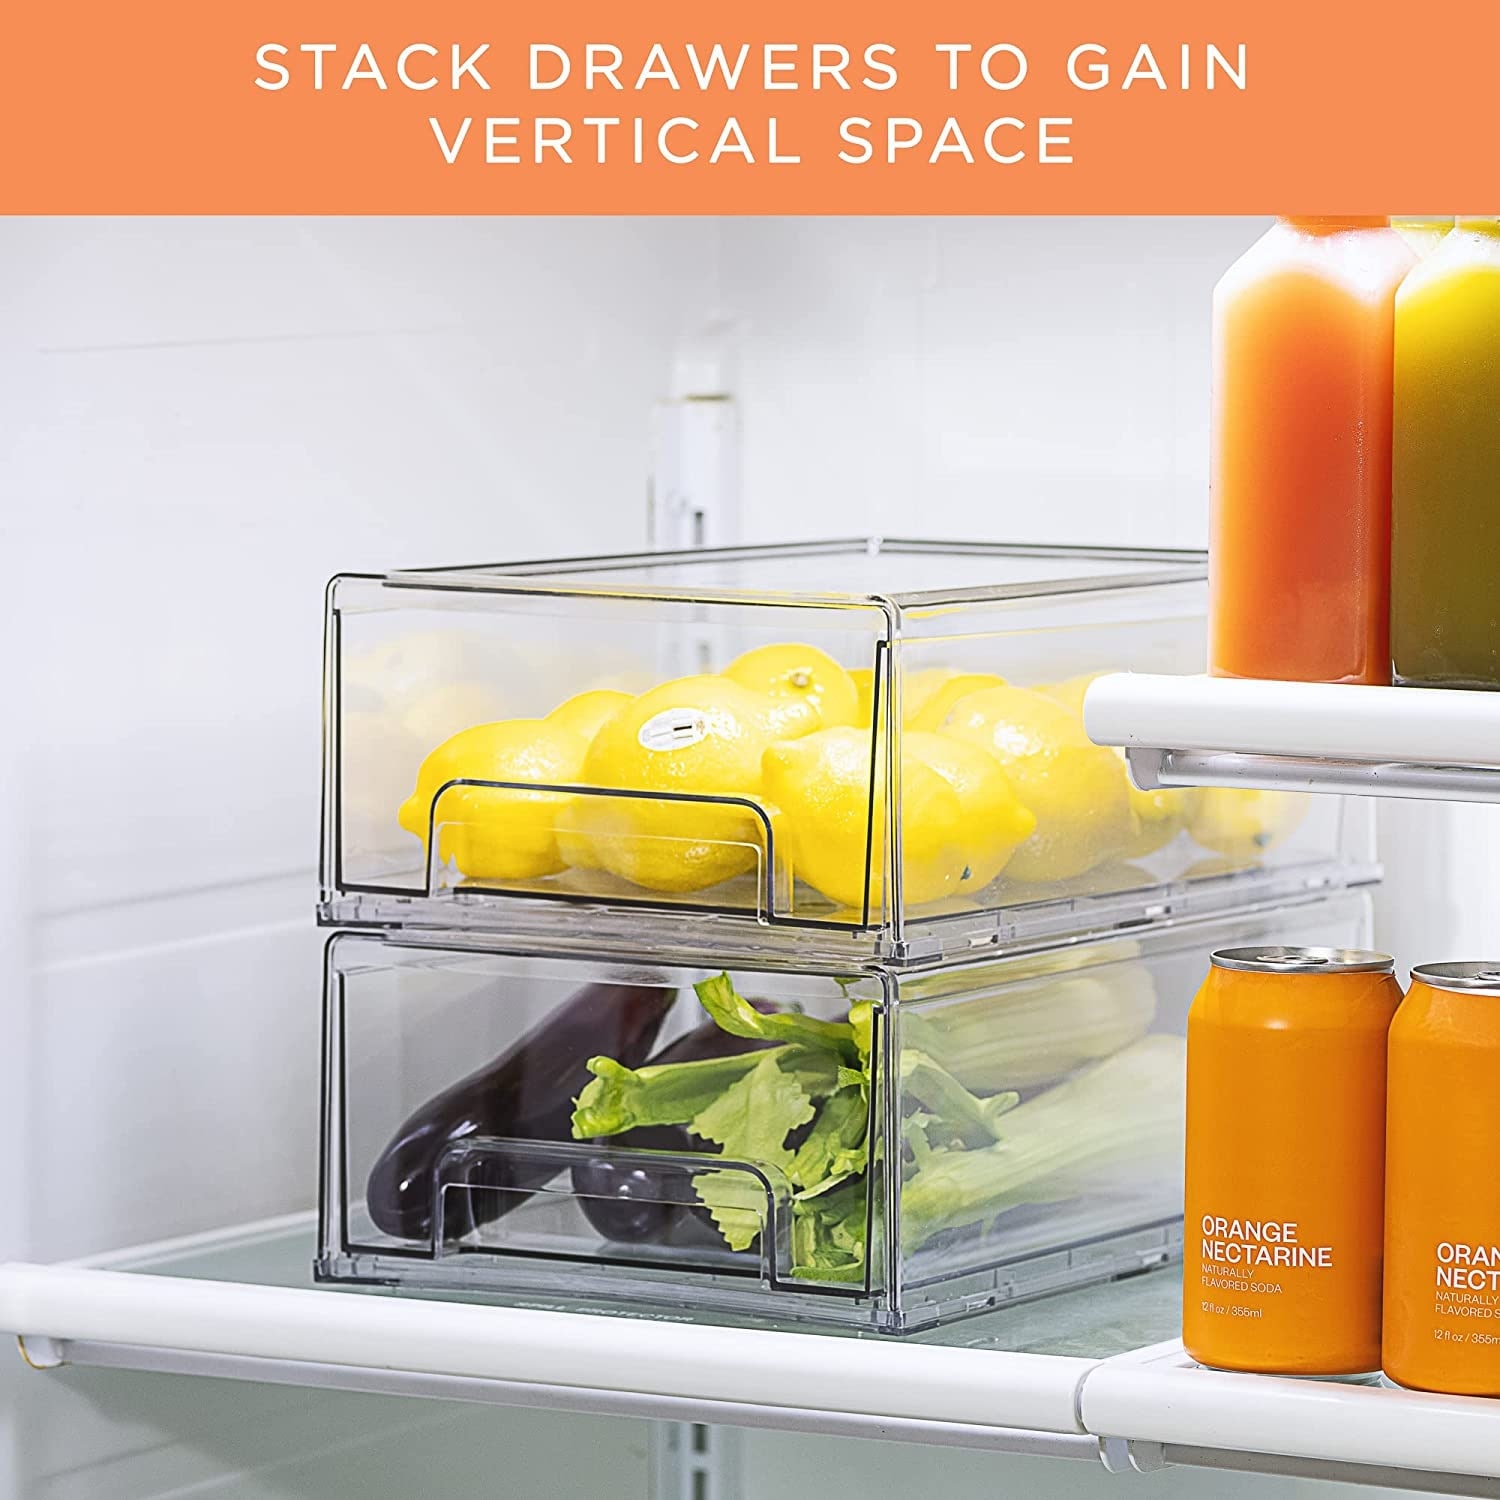 https://ak1.ostkcdn.com/images/products/is/images/direct/4240cd1e1b420b5400df228e5dad63f86bbce6ba/Sorbus-Fridge-Drawers---Clear-Stackable-Pull-Out-Refrigerator-Organizer-Bins-2-Pack%2C-Medium.jpg